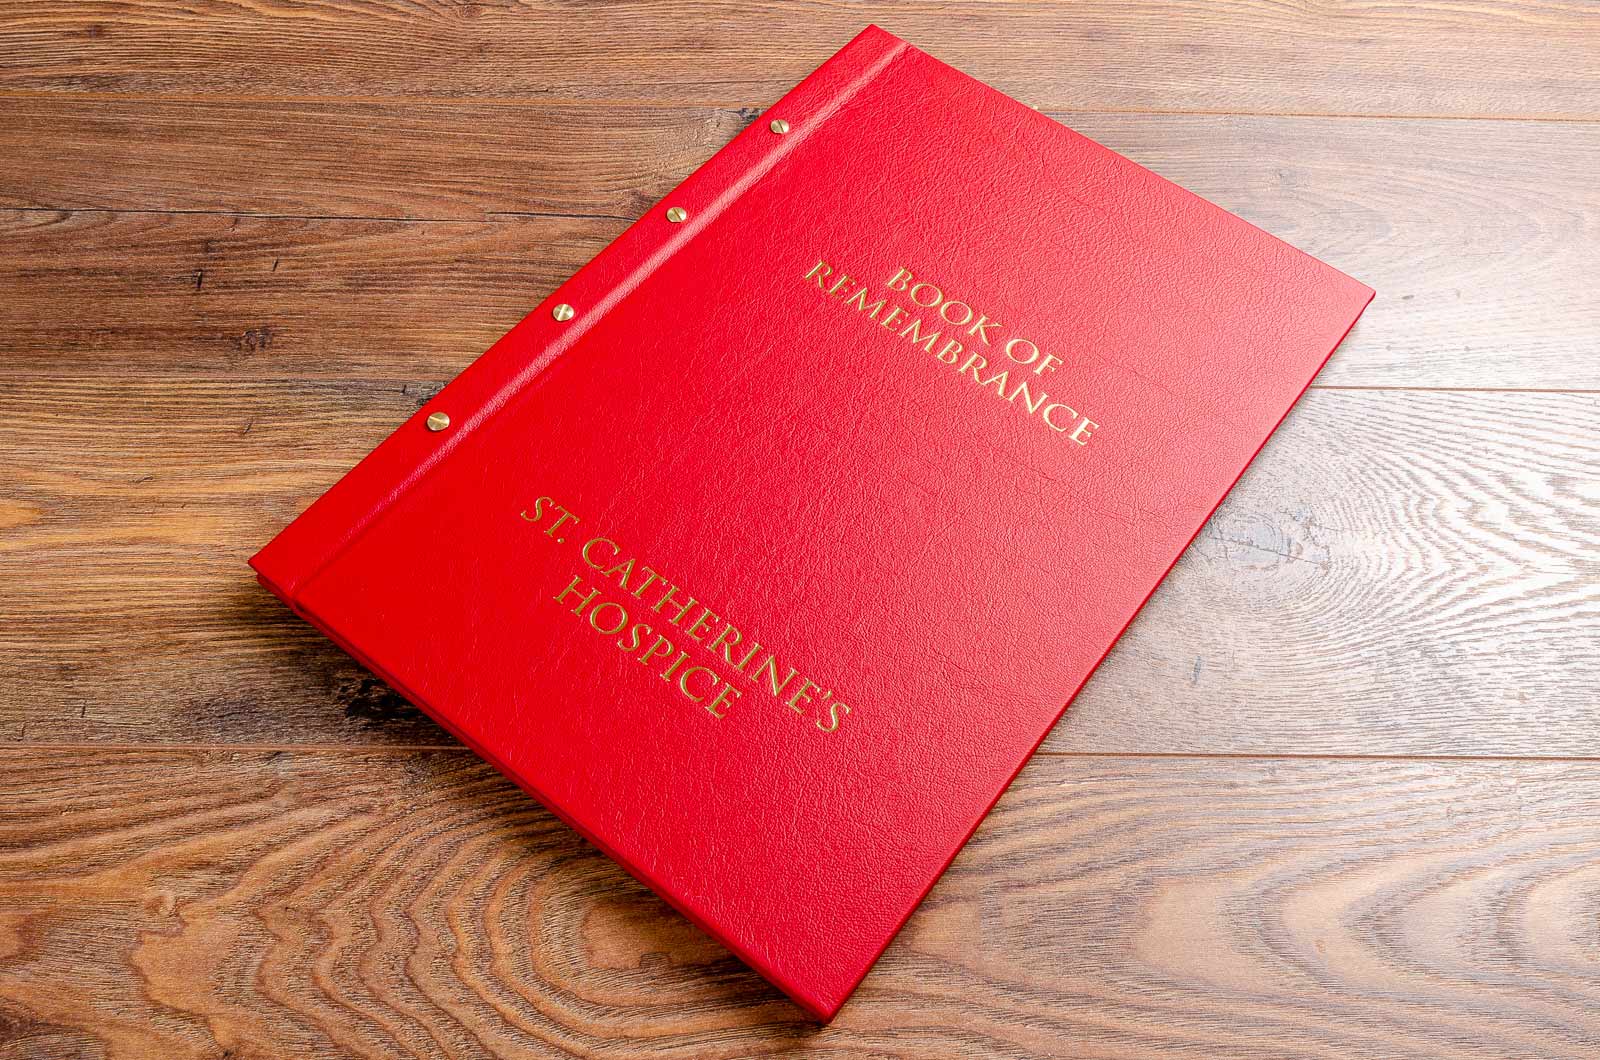 A3 leather bound personalised book or remembrance with gold foil embossed cover